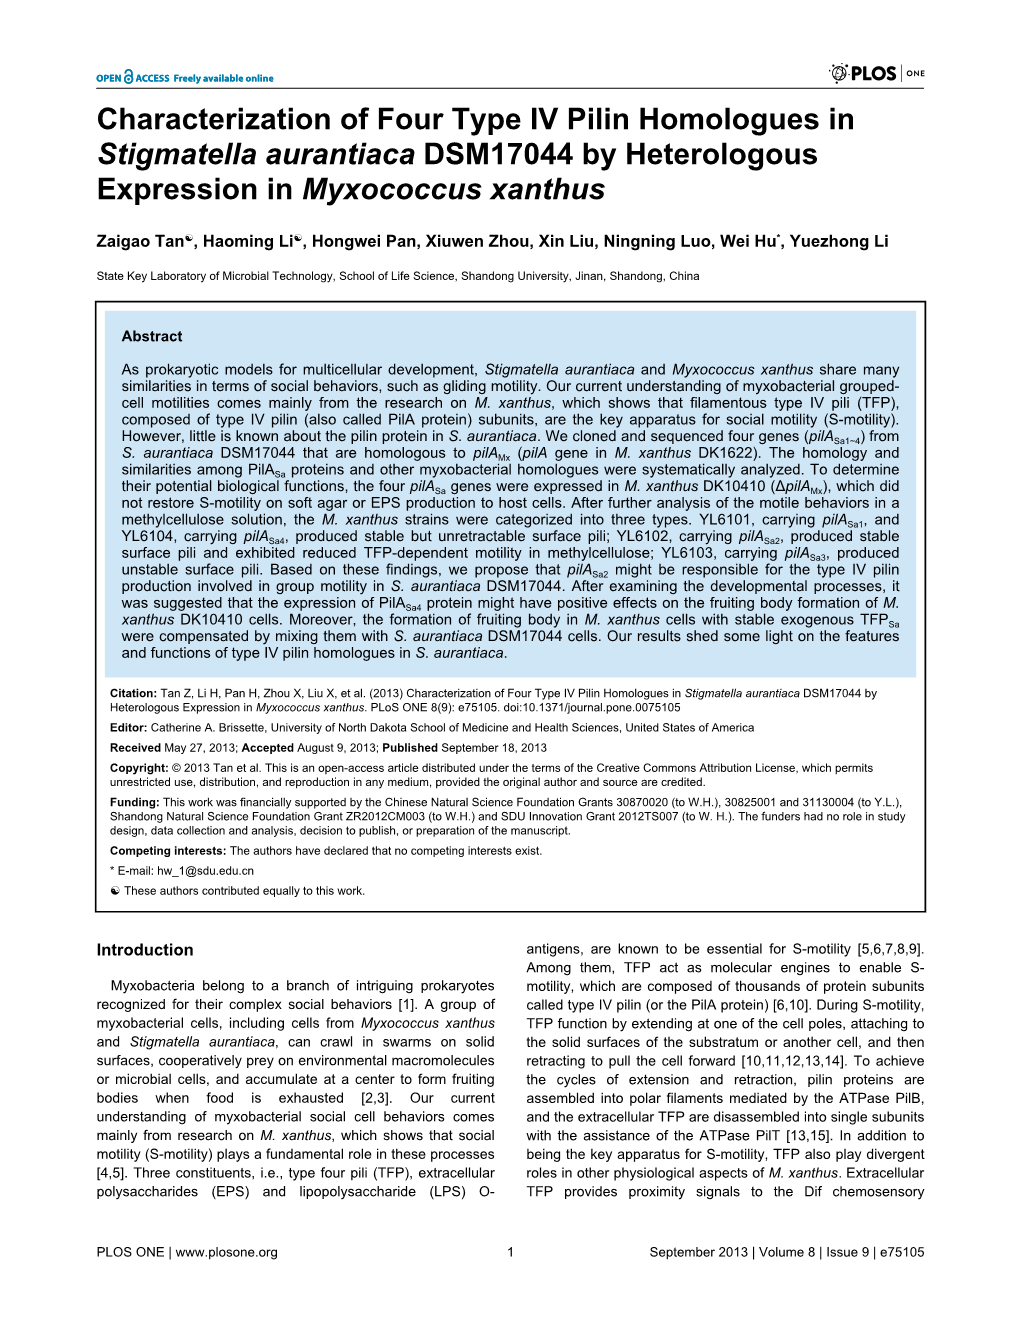 Characterization of Four Type IV Pilin Homologues in Stigmatella Aurantiaca DSM17044 by Heterologous Expression in Myxococcus Xanthus